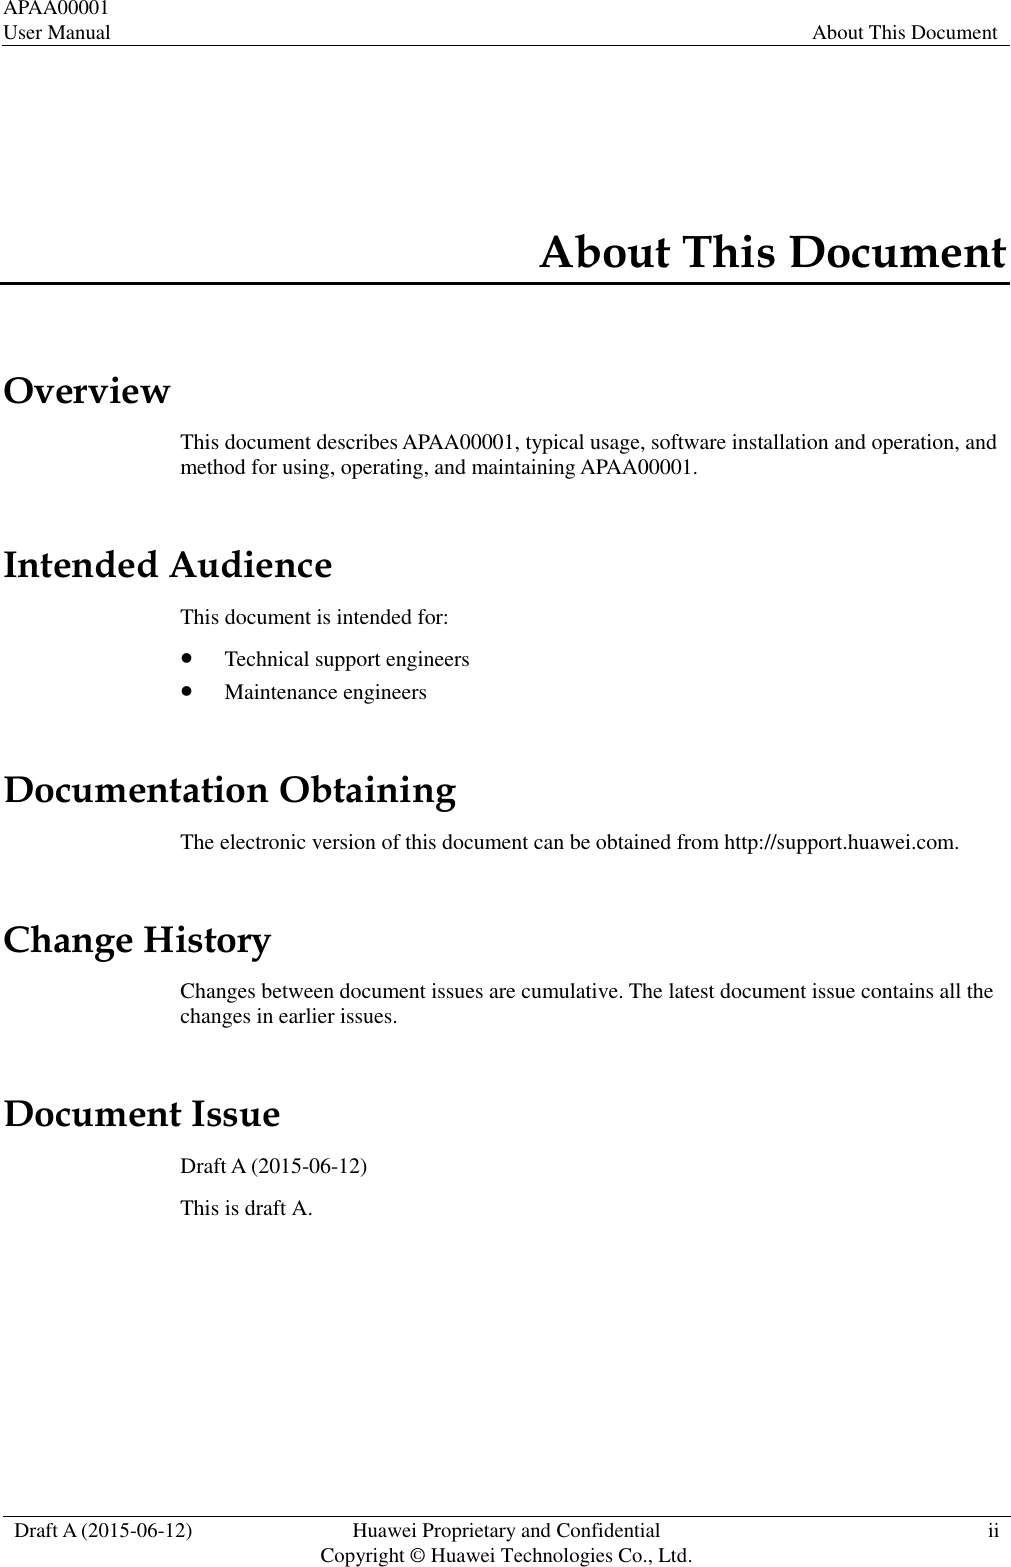 APAA00001 User Manual About This Document  Draft A (2015-06-12) Huawei Proprietary and Confidential           Copyright © Huawei Technologies Co., Ltd. ii  About This Document Overview This document describes APAA00001, typical usage, software installation and operation, and method for using, operating, and maintaining APAA00001. Intended Audience This document is intended for:  Technical support engineers  Maintenance engineers Documentation Obtaining The electronic version of this document can be obtained from http://support.huawei.com. Change History Changes between document issues are cumulative. The latest document issue contains all the changes in earlier issues. Document Issue Draft A (2015-06-12) This is draft A.  